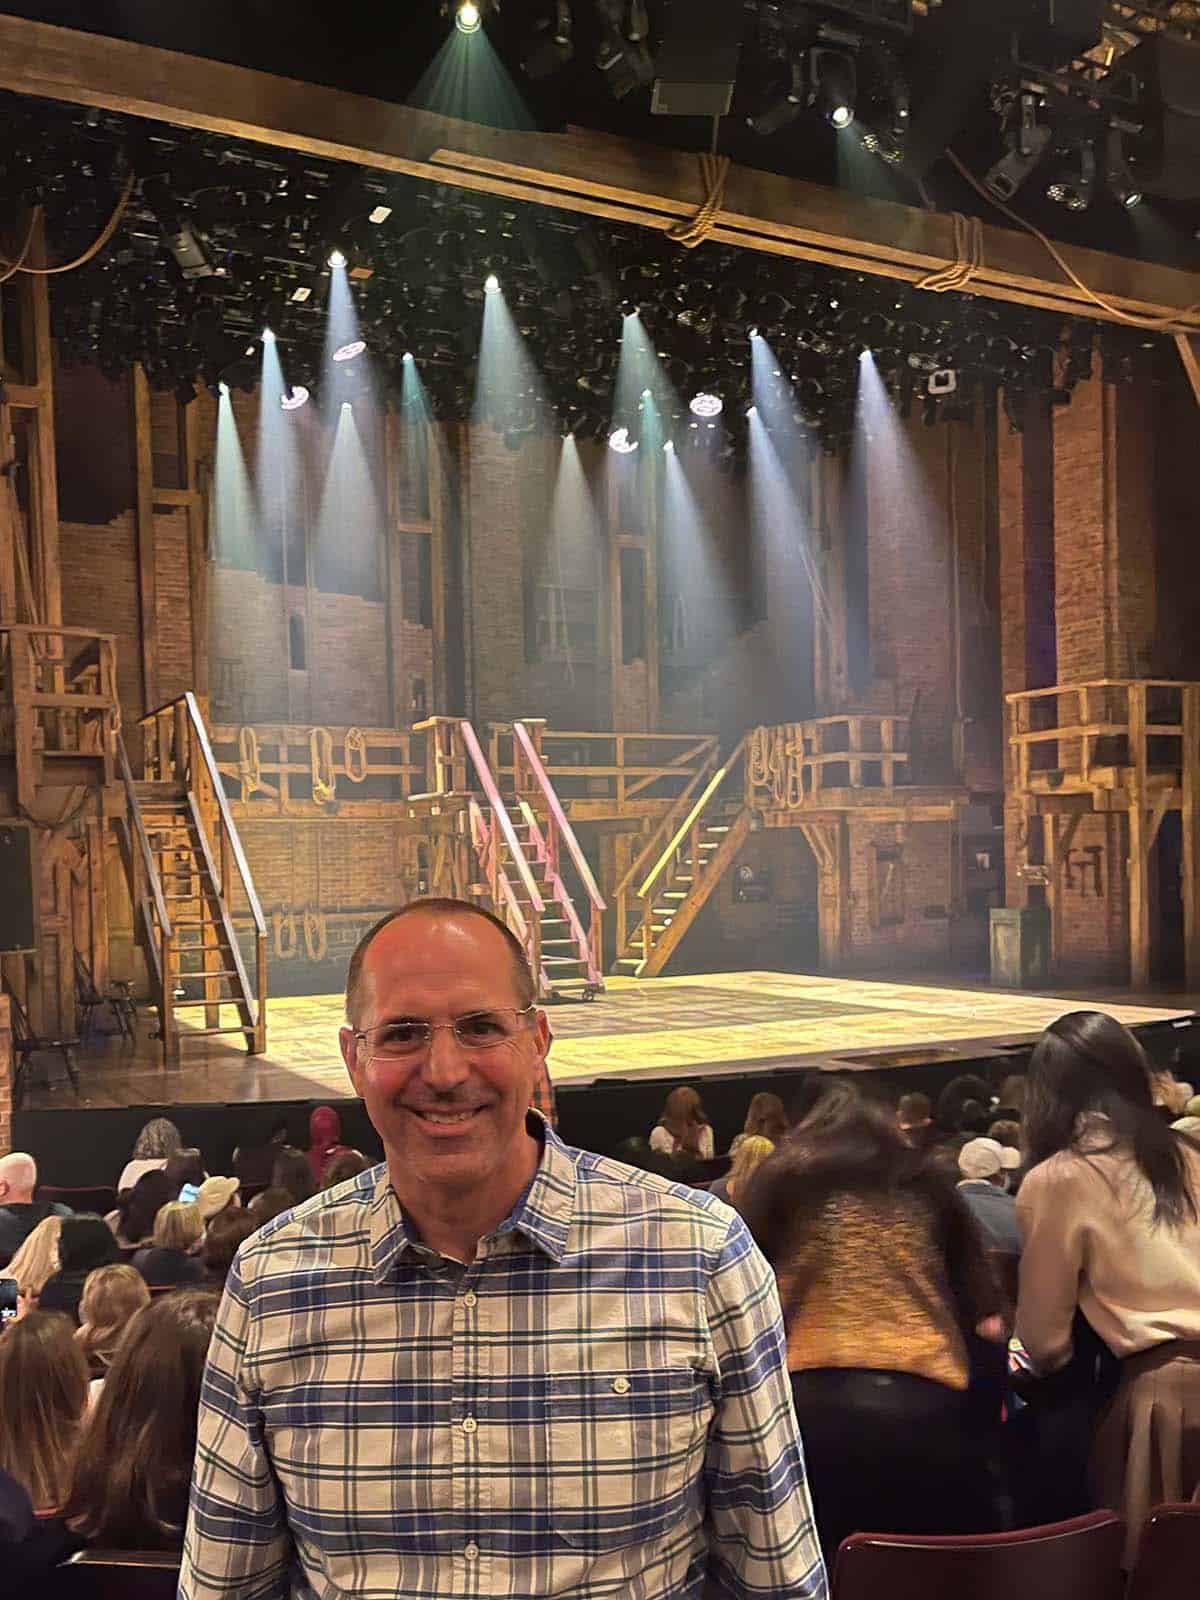 Mike in front of the Hamilton stage.